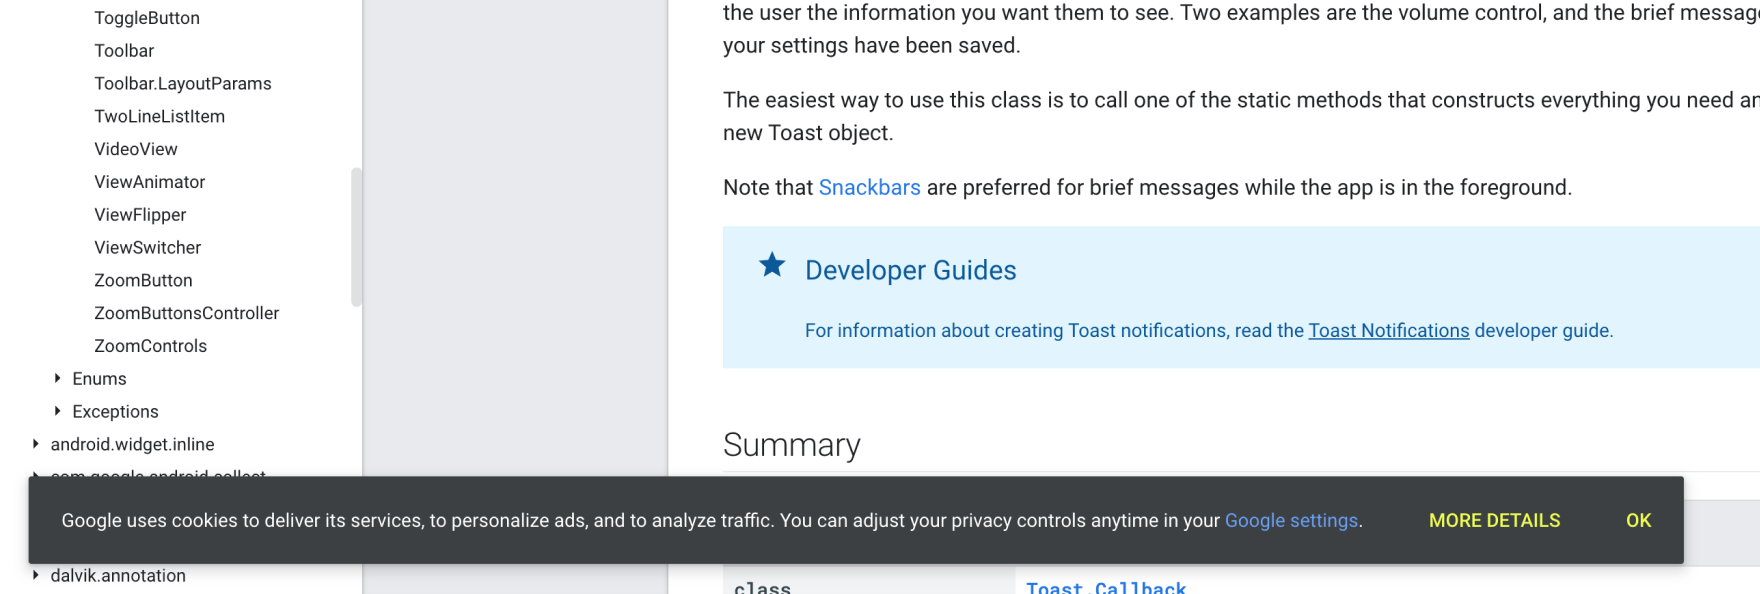 A notification Toast in Google's developer documentation, at the bottom left corner of the screen